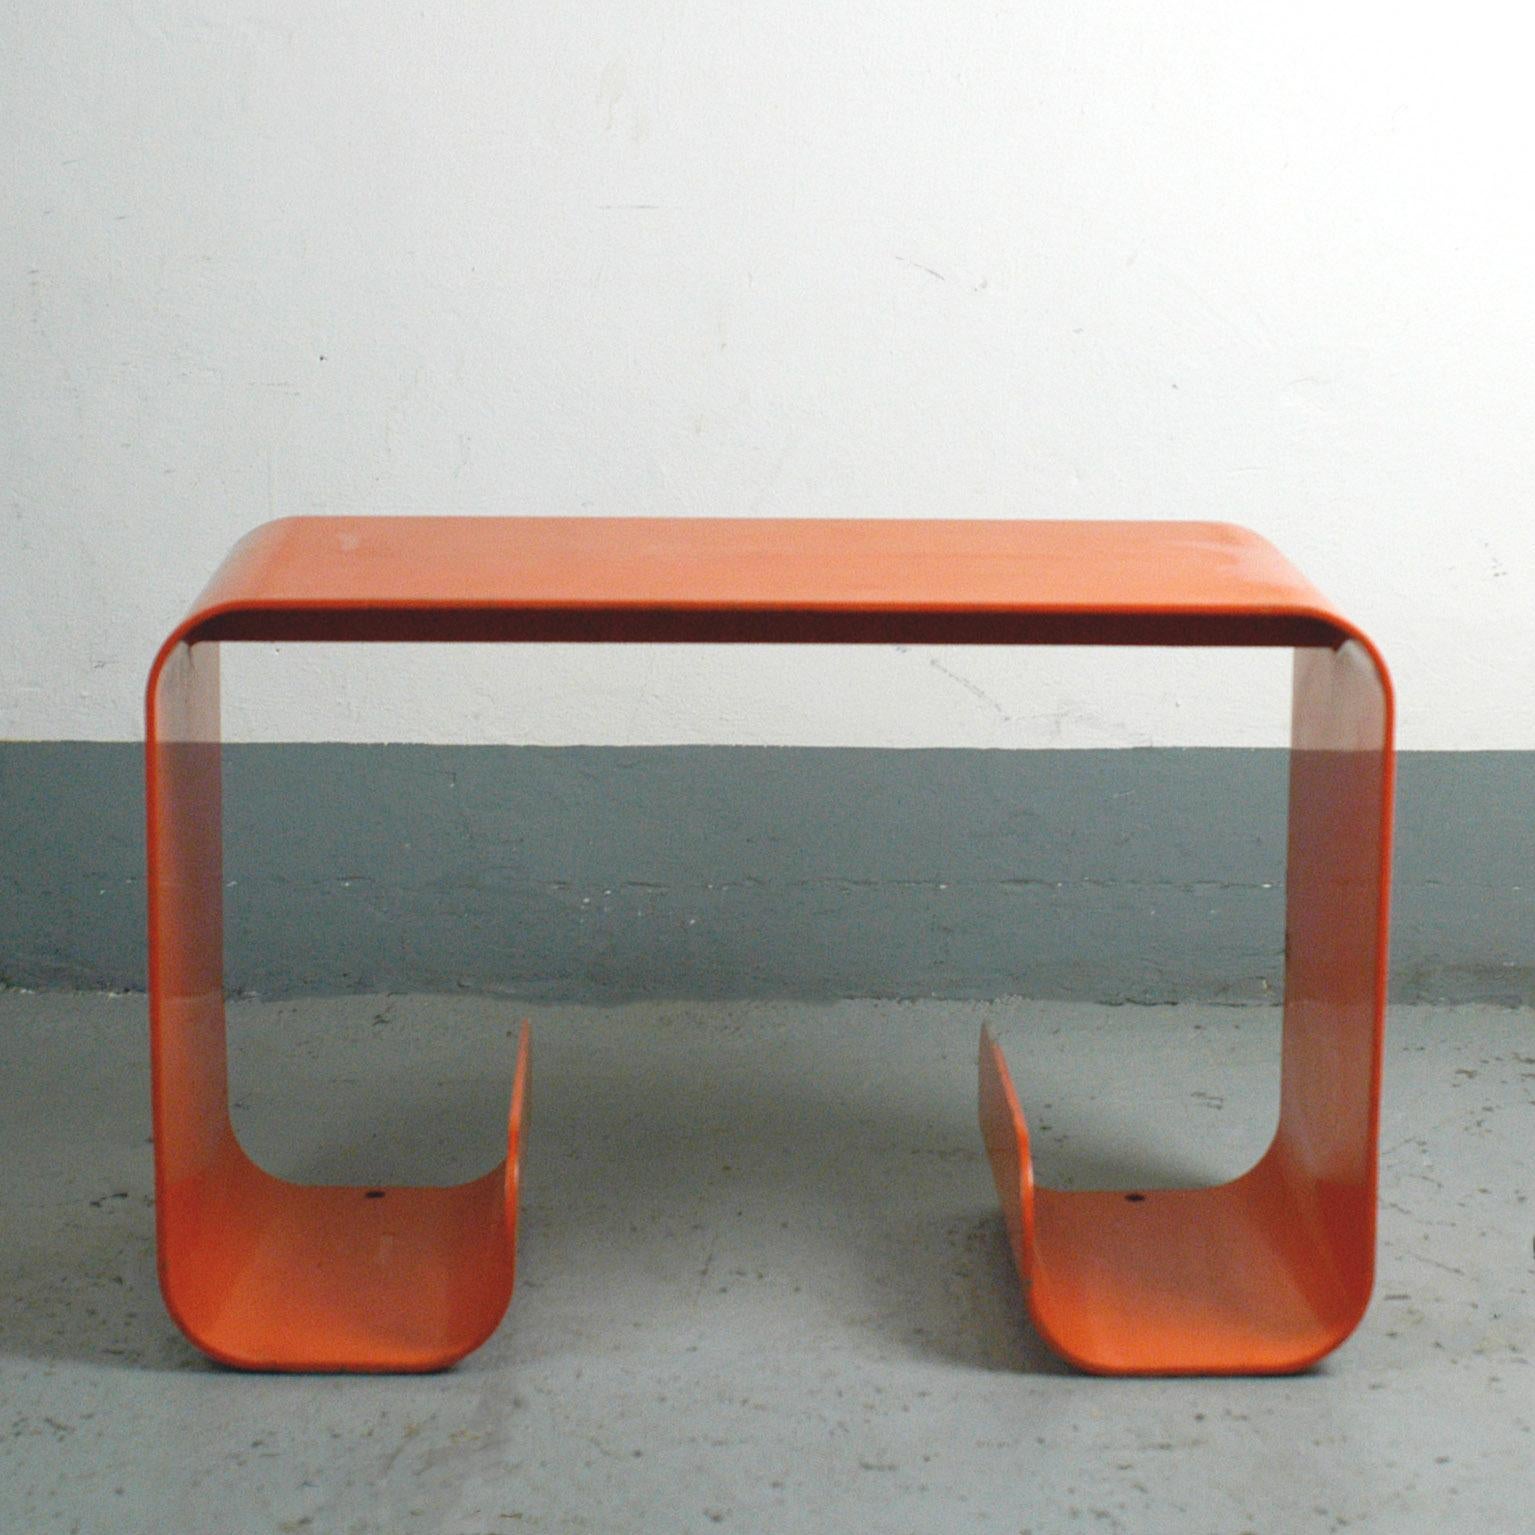 Charming orange lacquered waterfall console table from the 1970s, probably produced in France. Very nice original vintage condition, strong and heavy quality.